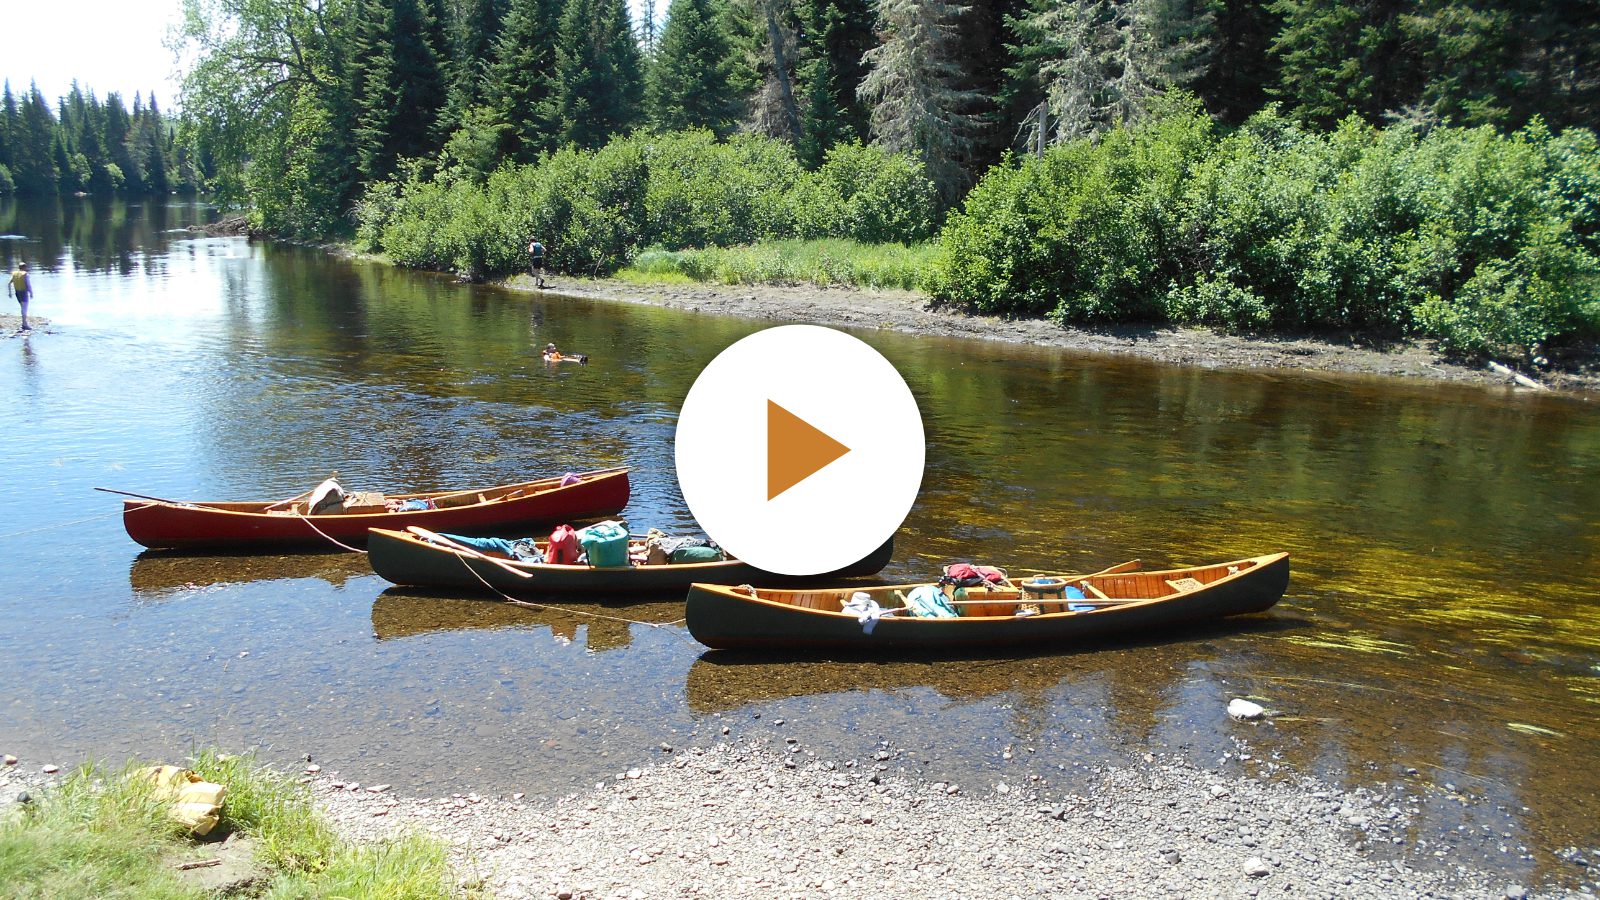 intro video for Guided Canoe, Dog Sled, and Fly Fishing Trips in Maine and Canada. 